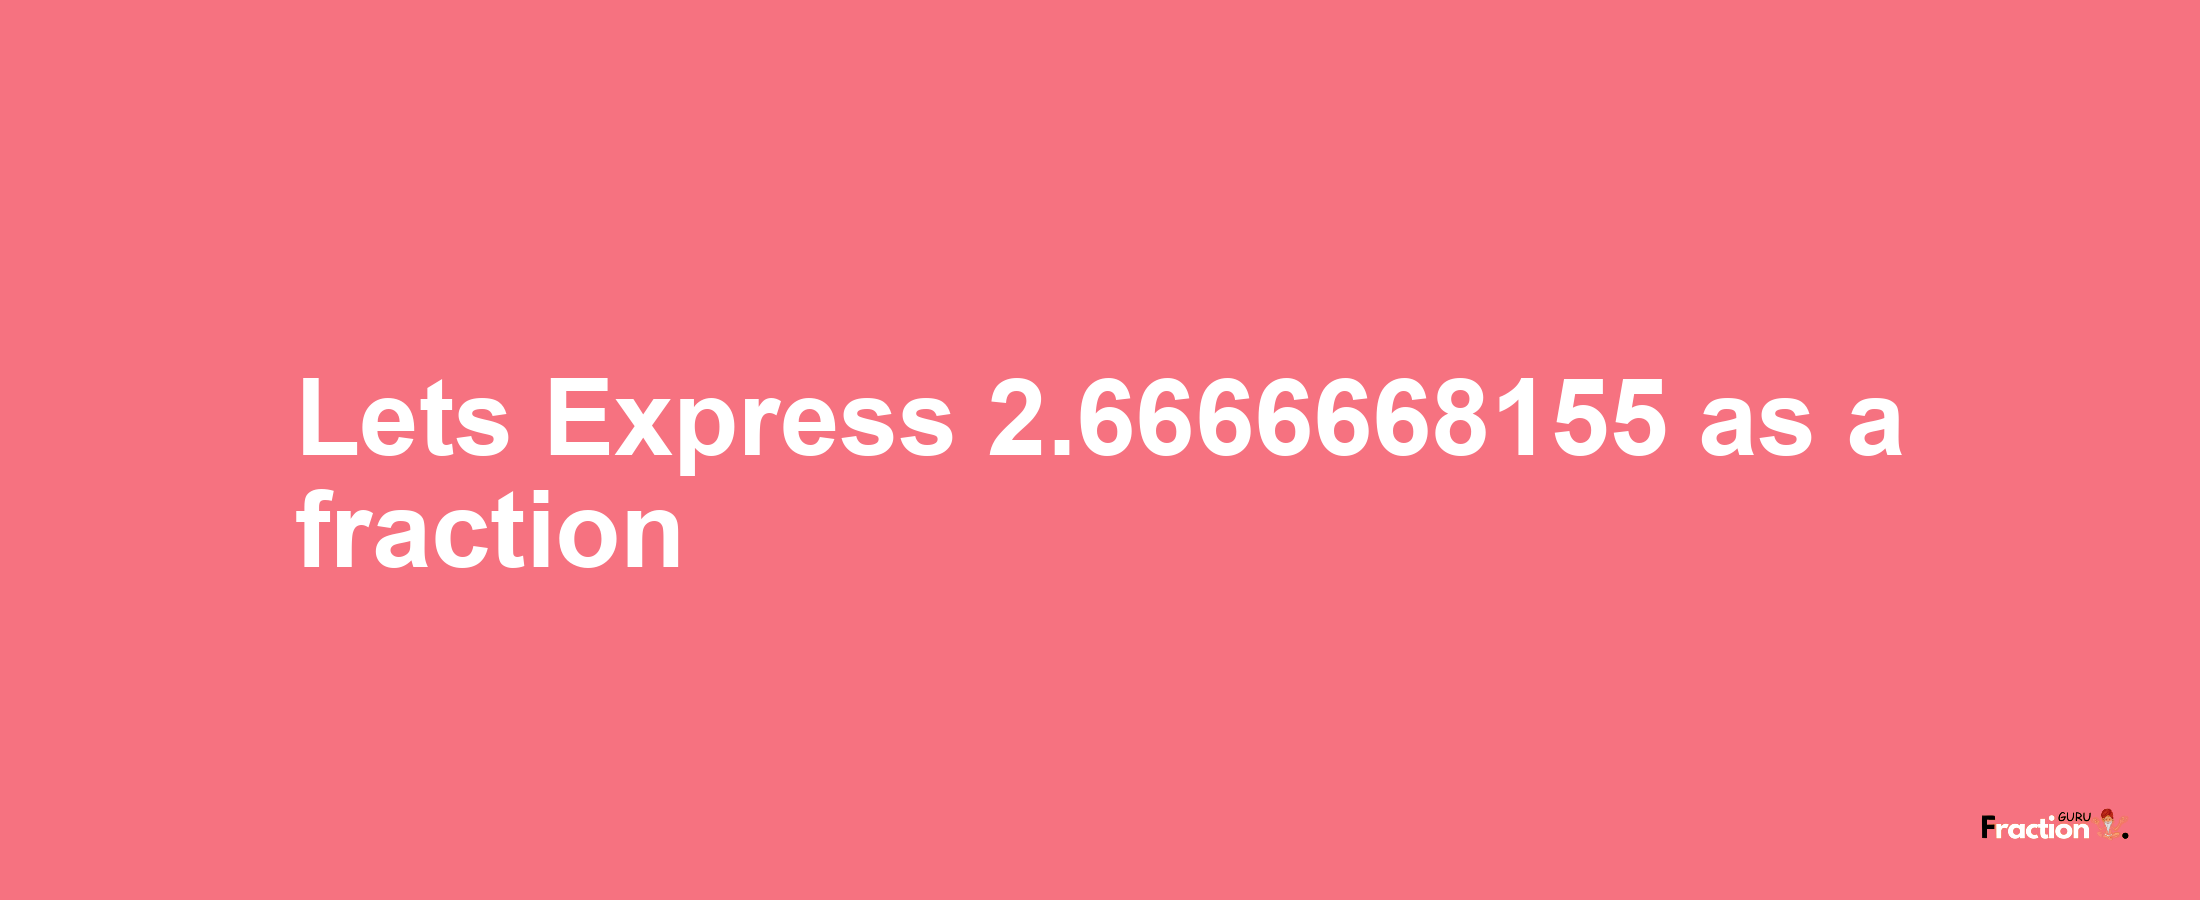 Lets Express 2.6666668155 as afraction